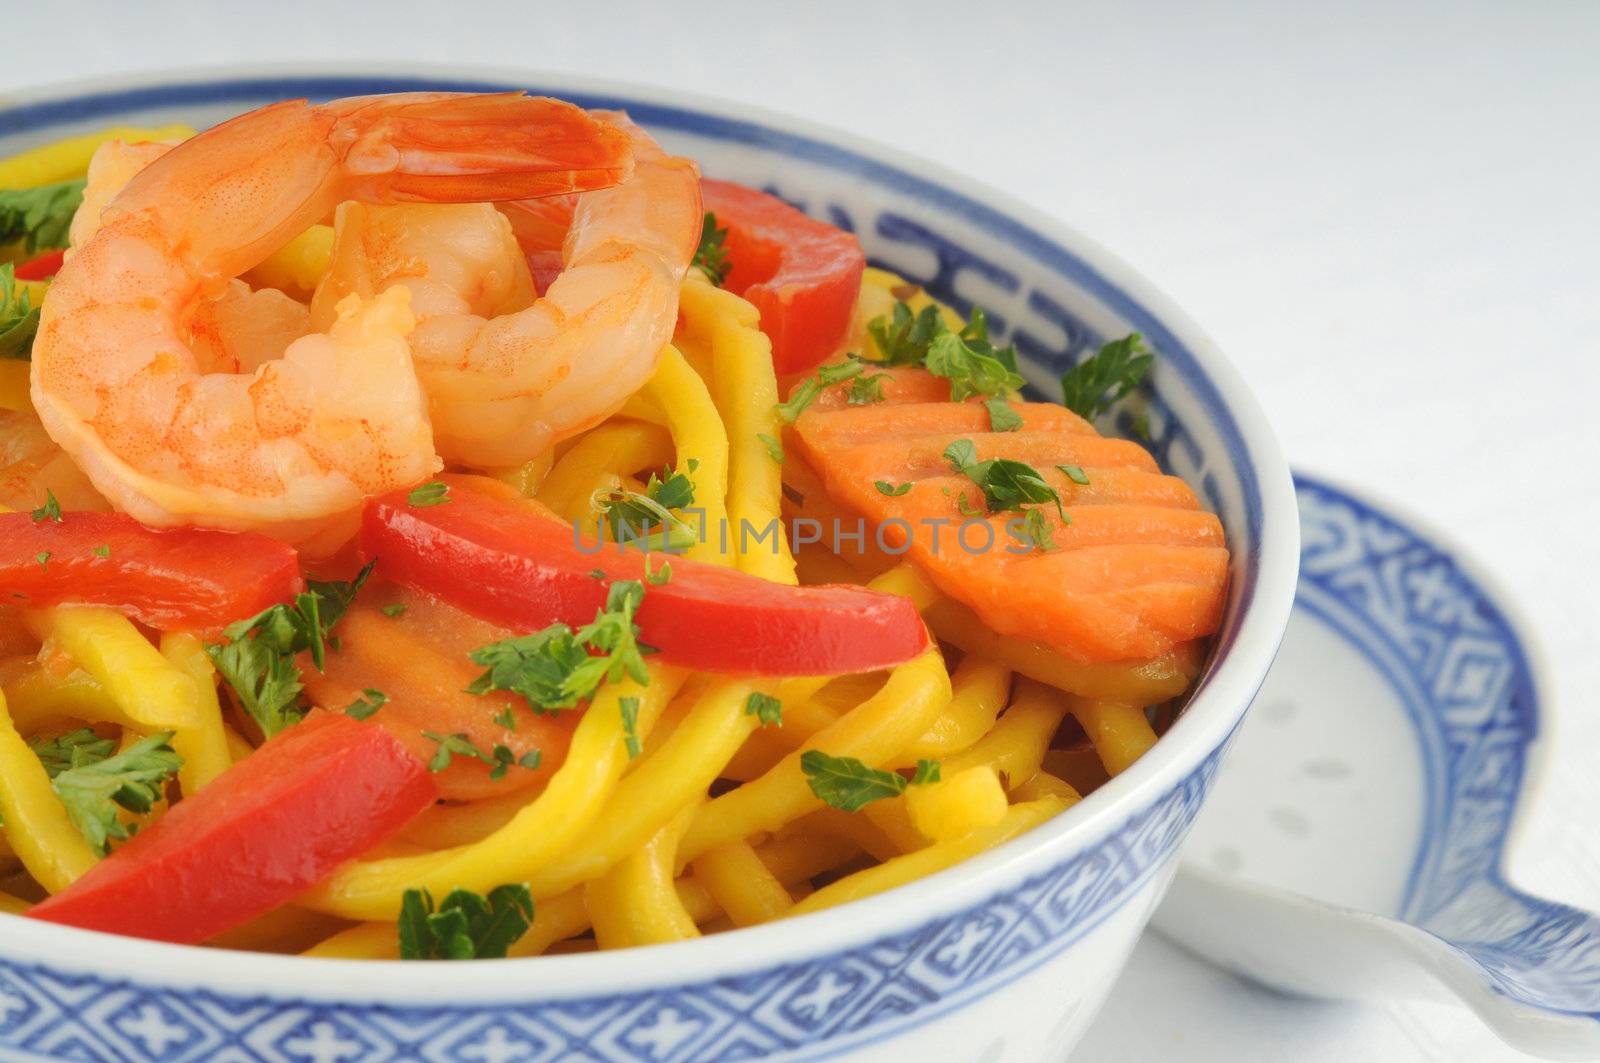 Bowl of chinese noodles with colorful shrimp and vegetables.